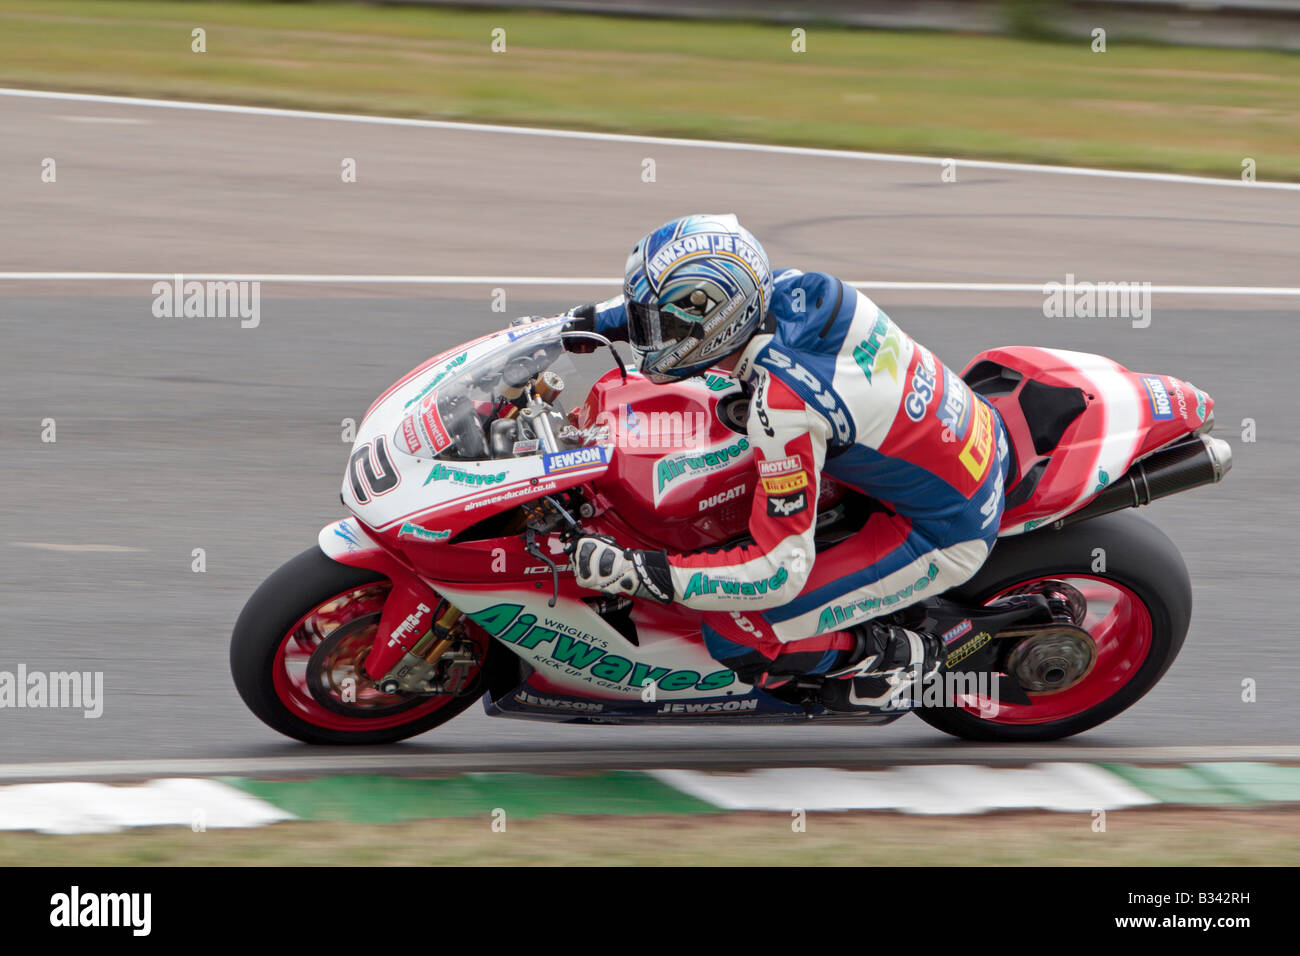 Leon Camier shafter no. 2 on the Airwaves Ducati at Fridays practice at Mallory park Leicestershire Stock Photo